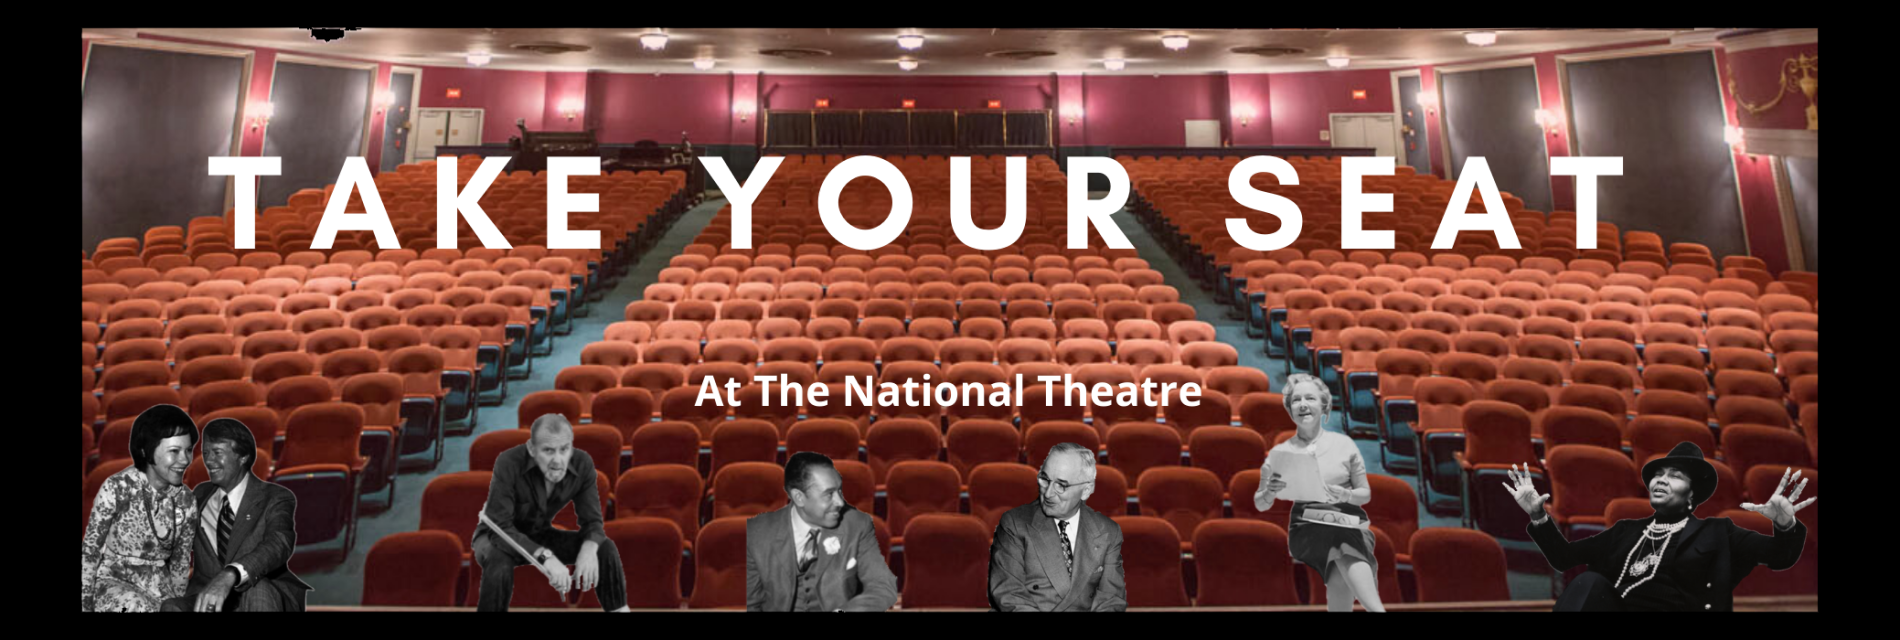 Slide 3: Dedicate a Seat at The National Theatre